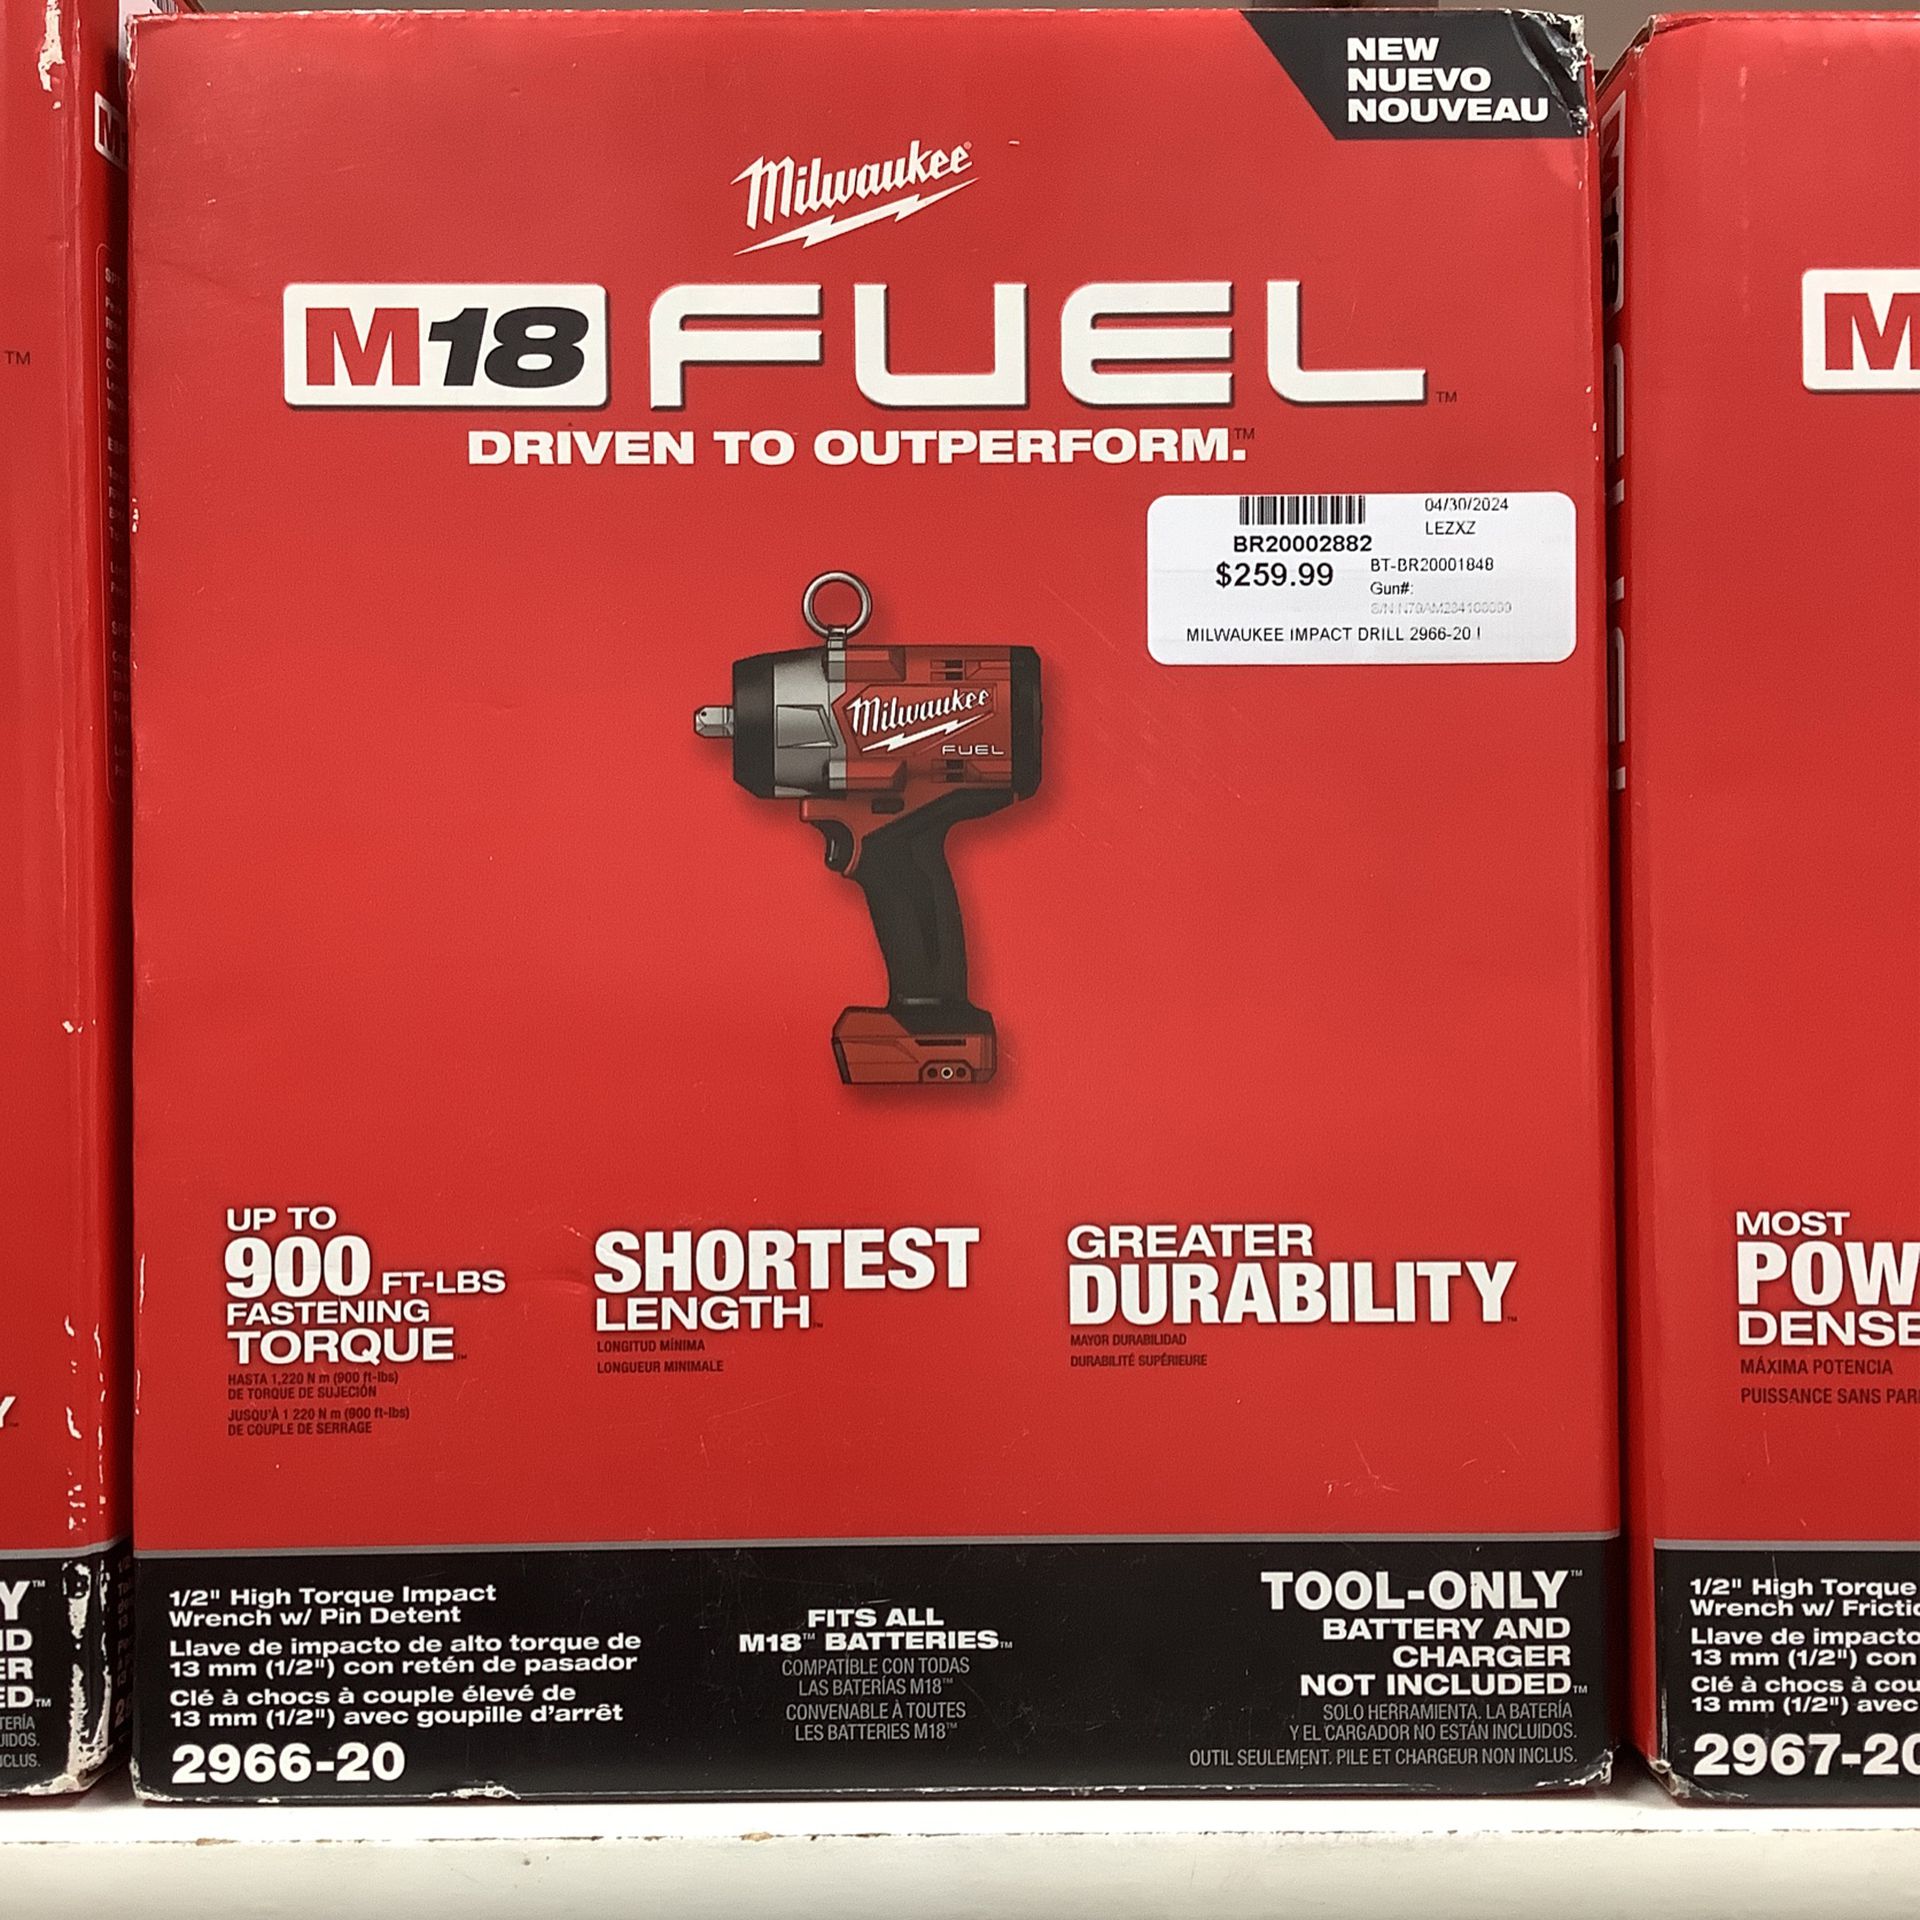 NEW Milwaukee 1/2” High Torque Impact Wrench TOOL ONLY